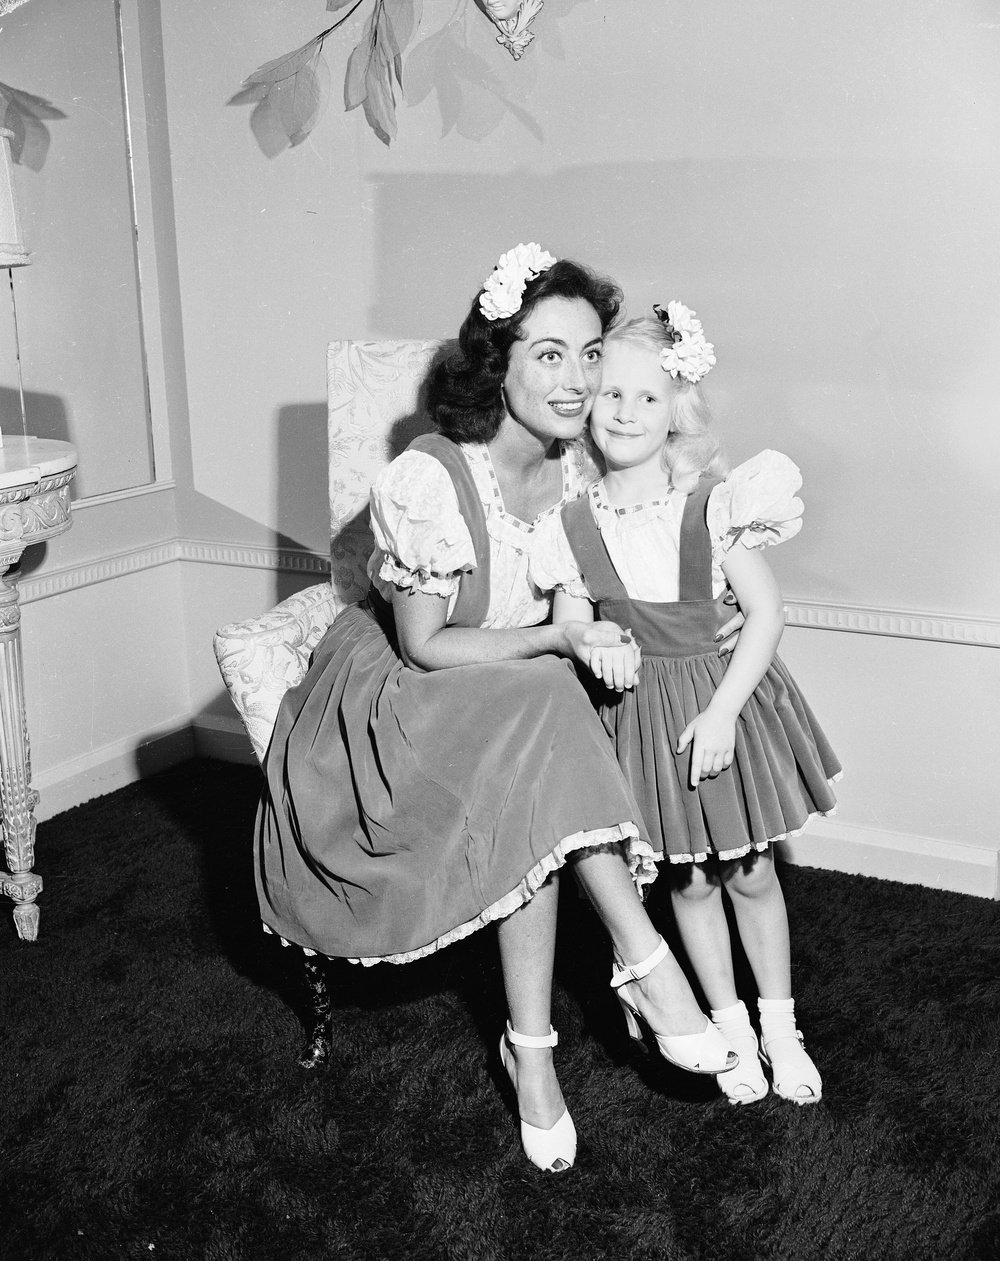 American actor Joan Crawford (1904 - 1977) hugs her adopted daughter Christina, wearing matching outfits, June 1944. (Photo by Gene Lester/Getty Images)